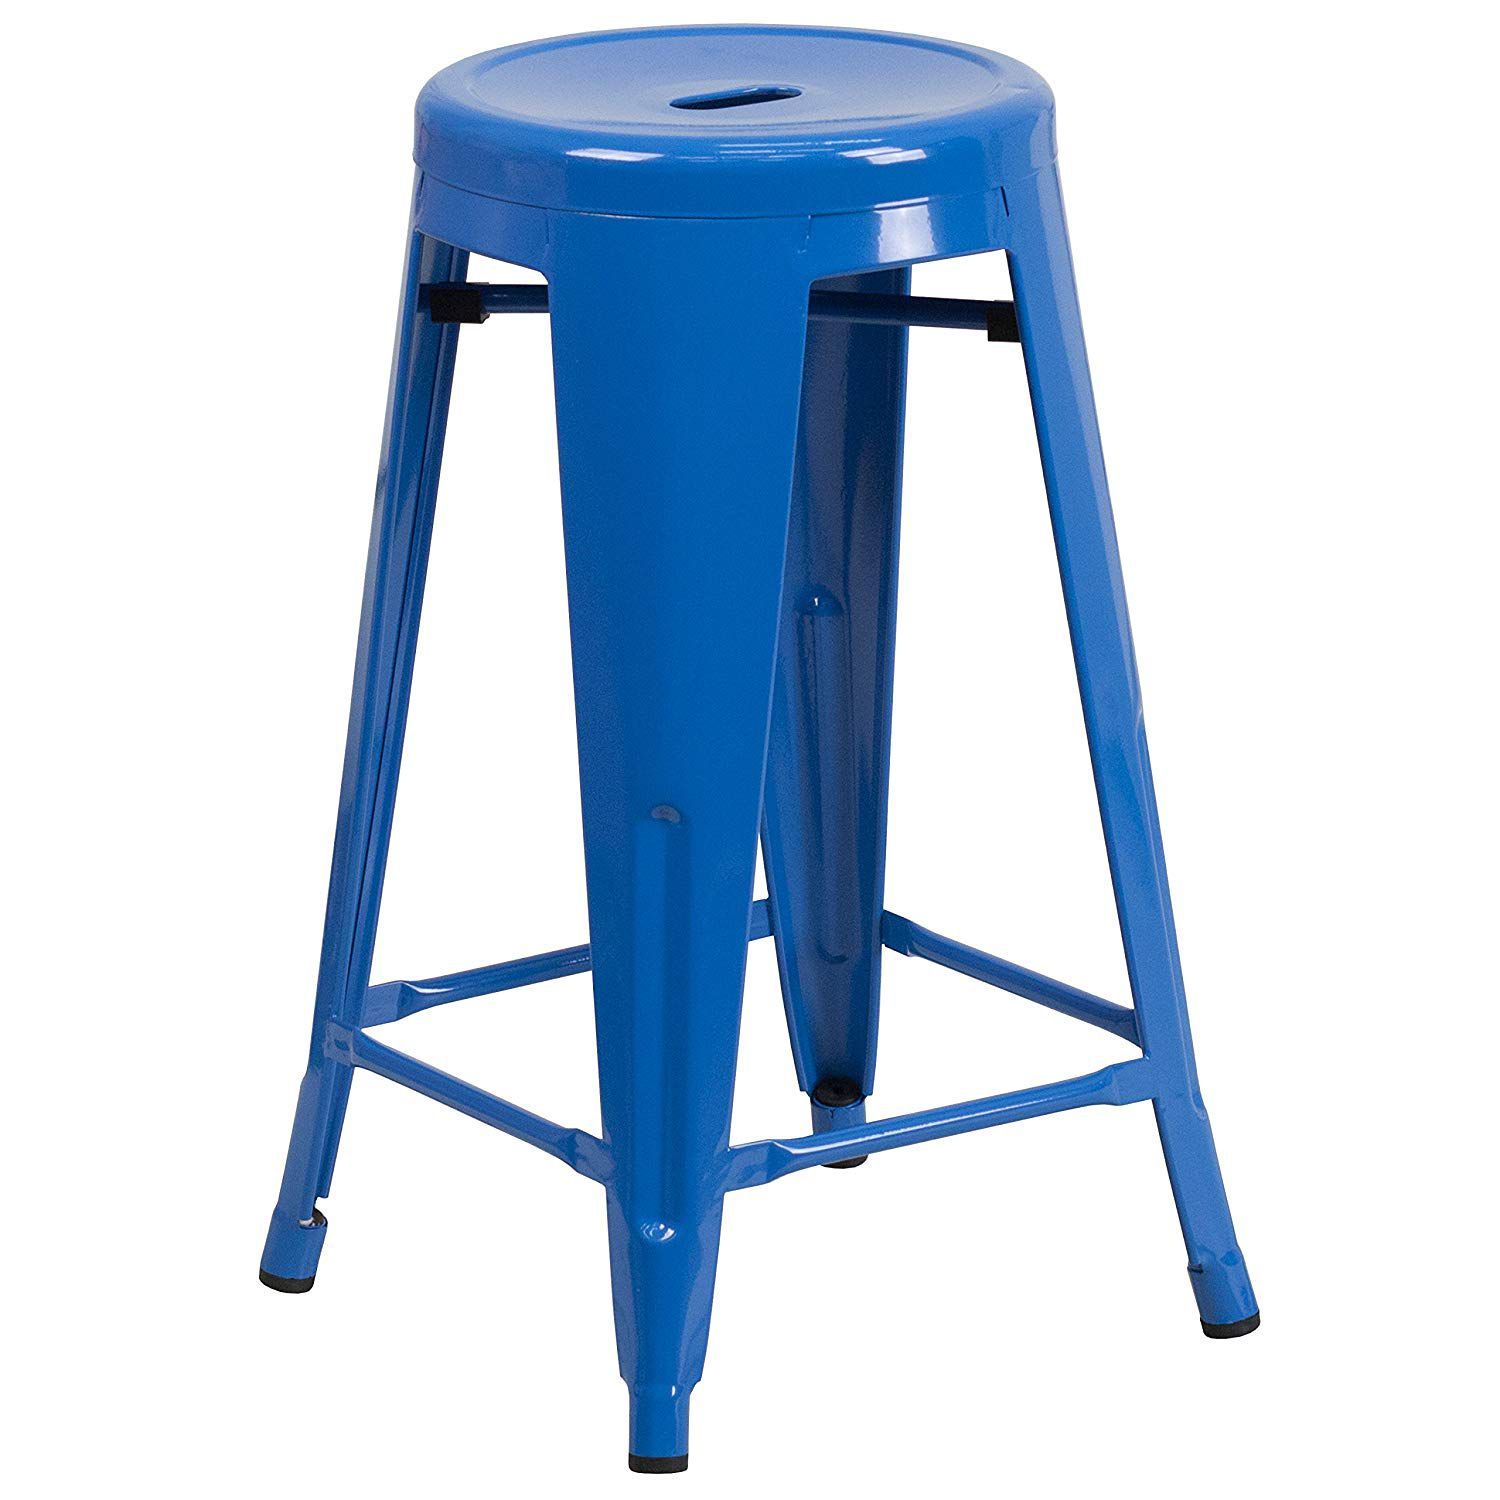 10 Colorful Bar Stools Your Kitchen, Colored Metal Bar Stools